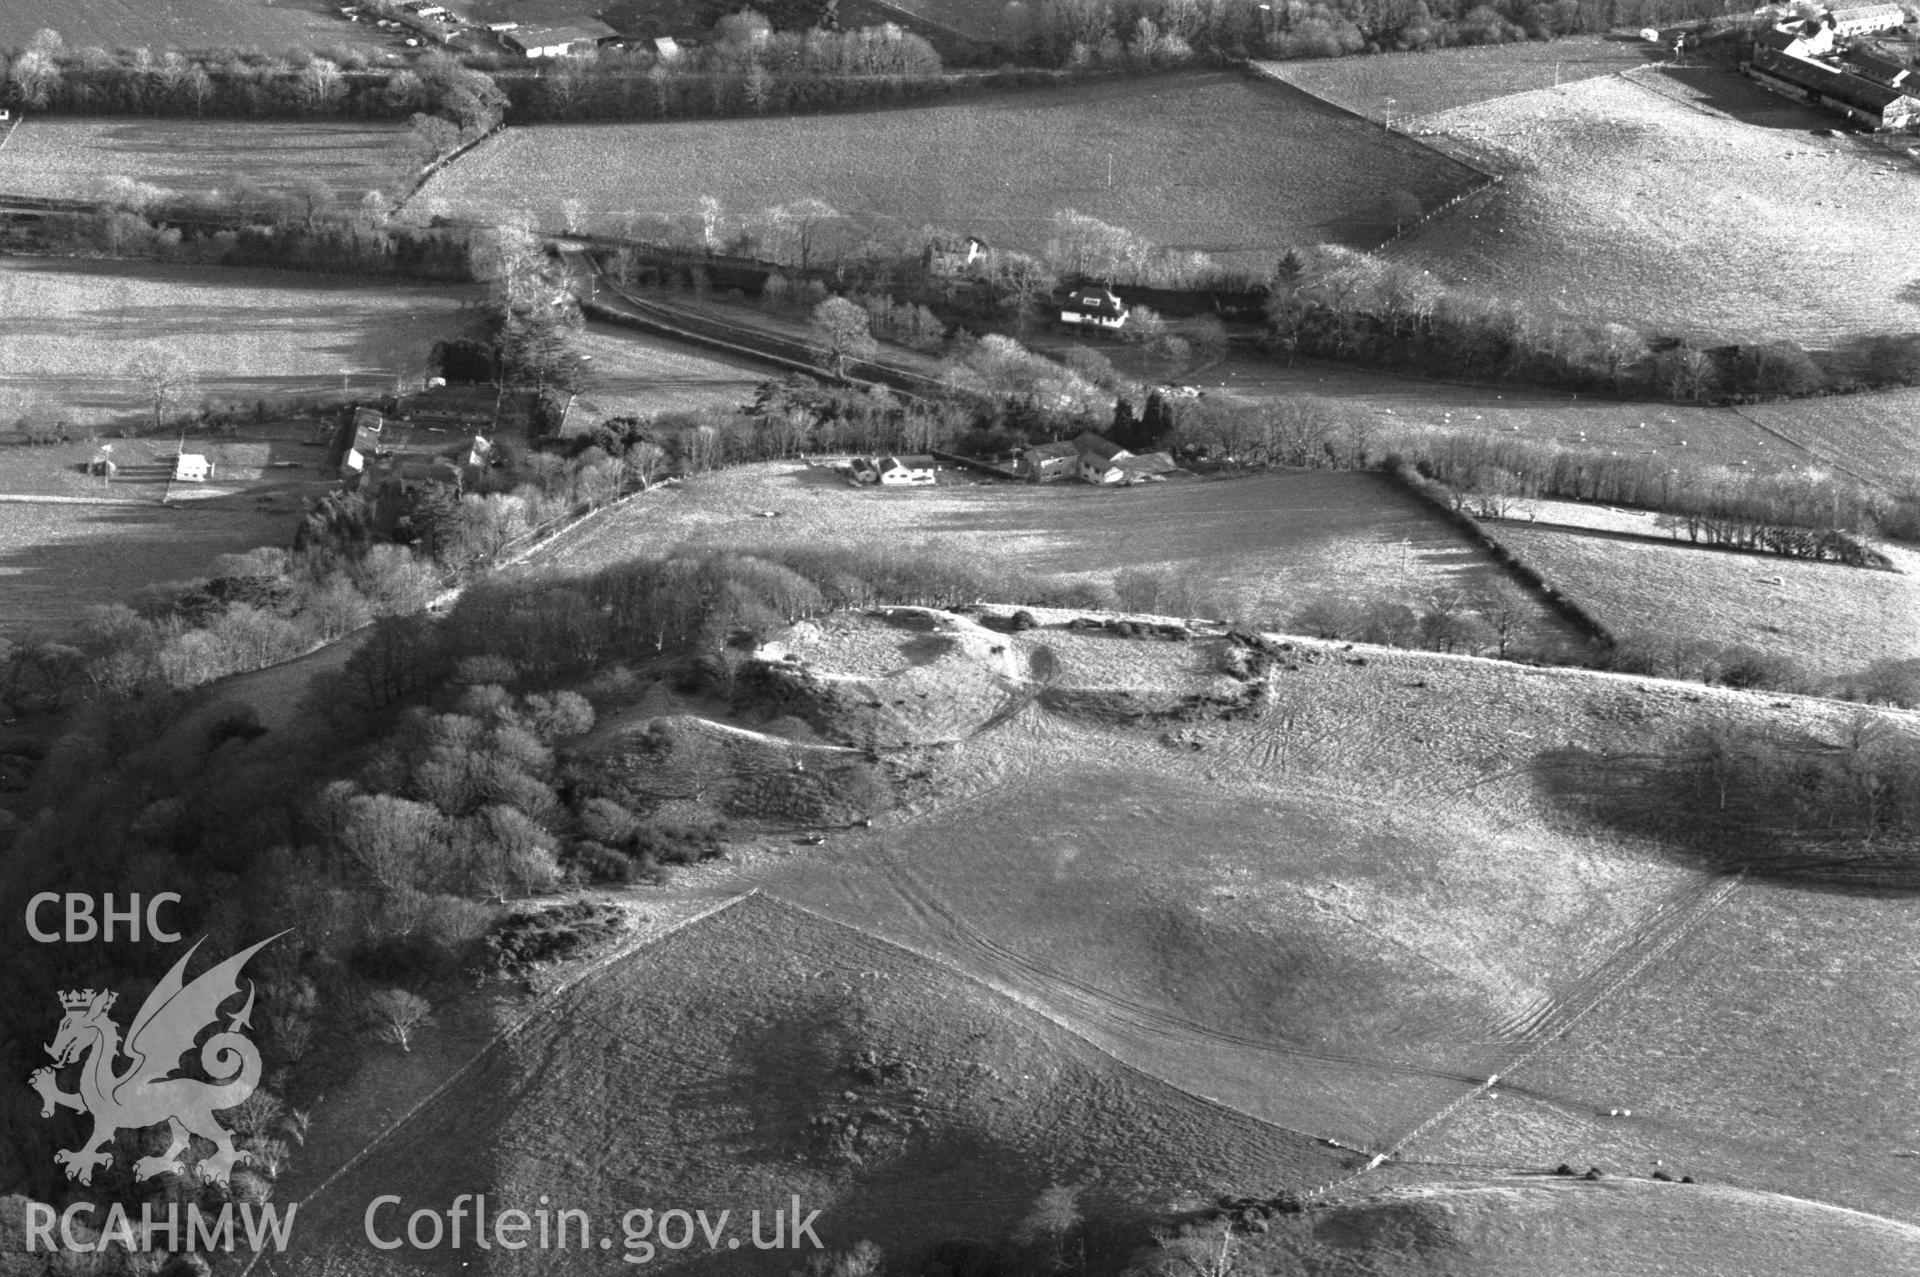 RCAHMW Black and white oblique aerial photograph of Castell Tan-y-castell (Old Aberystwyth Castle), Llanfarian, taken on 04/12/1998 by Toby Driver